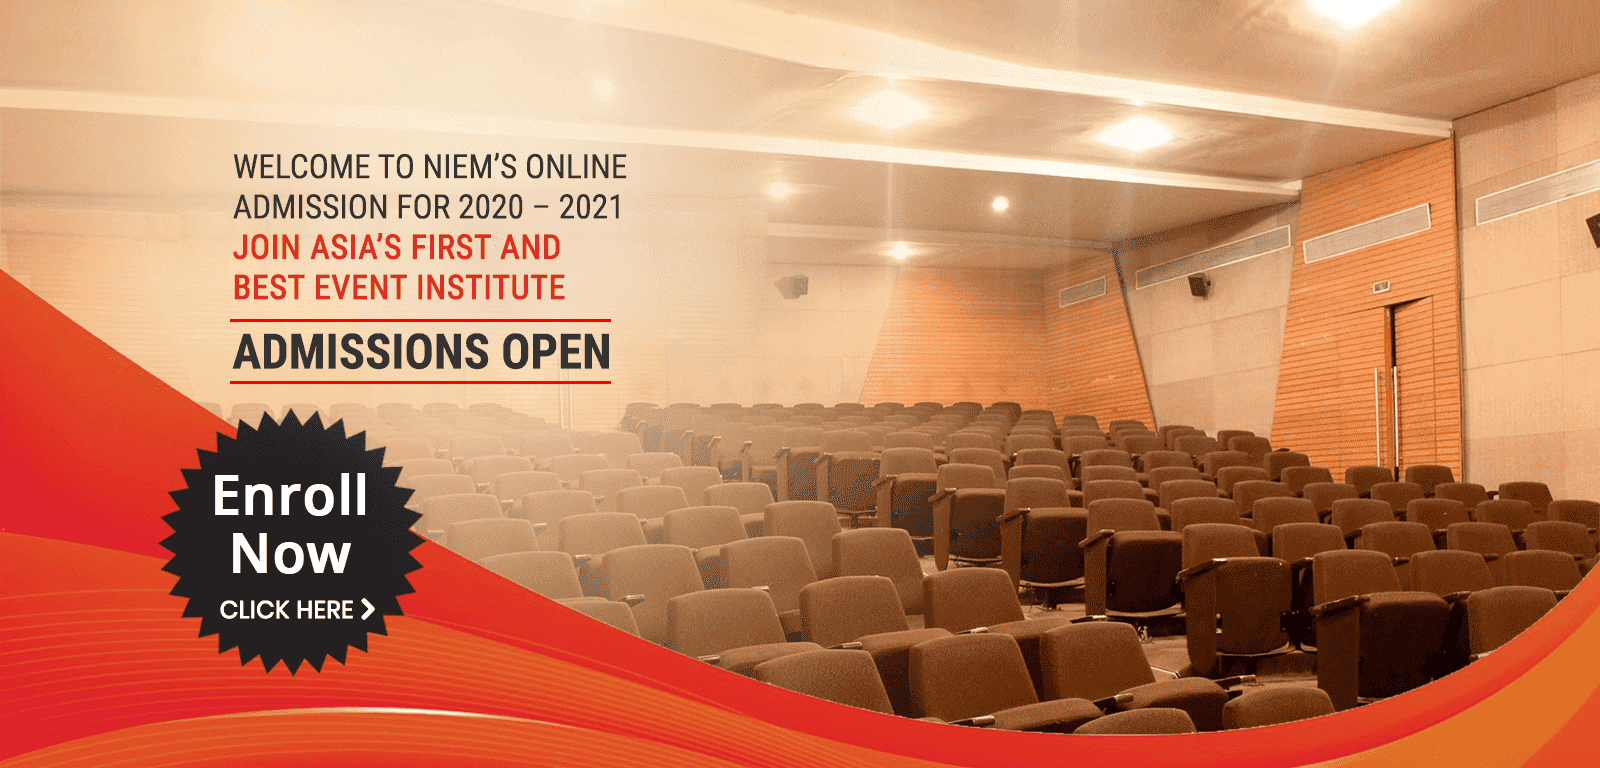 Enroll Now In Best Institute For Event Management